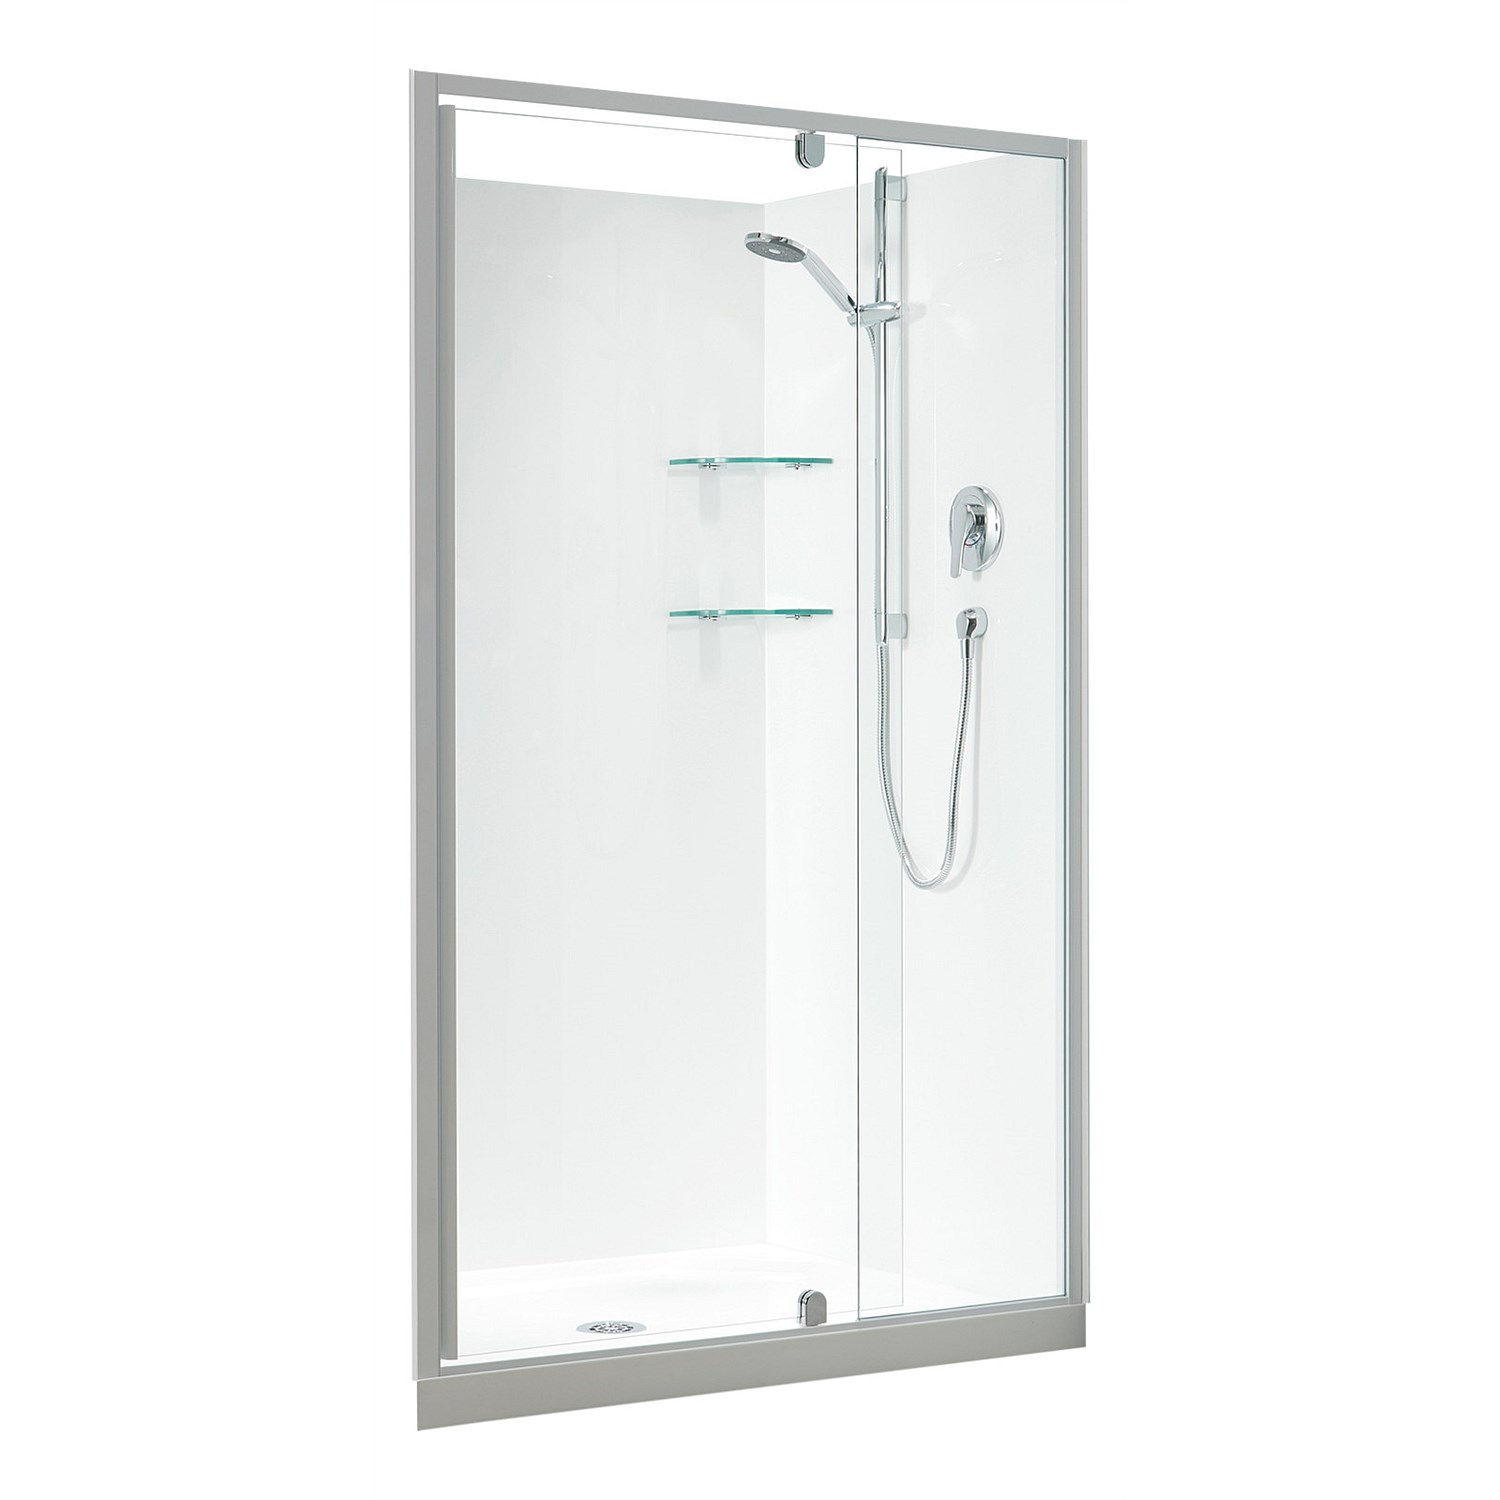 Clearlite Sierra 1200mm 3 Sided Rectangle Shower Enclosure pertaining to proportions 1500 X 1500